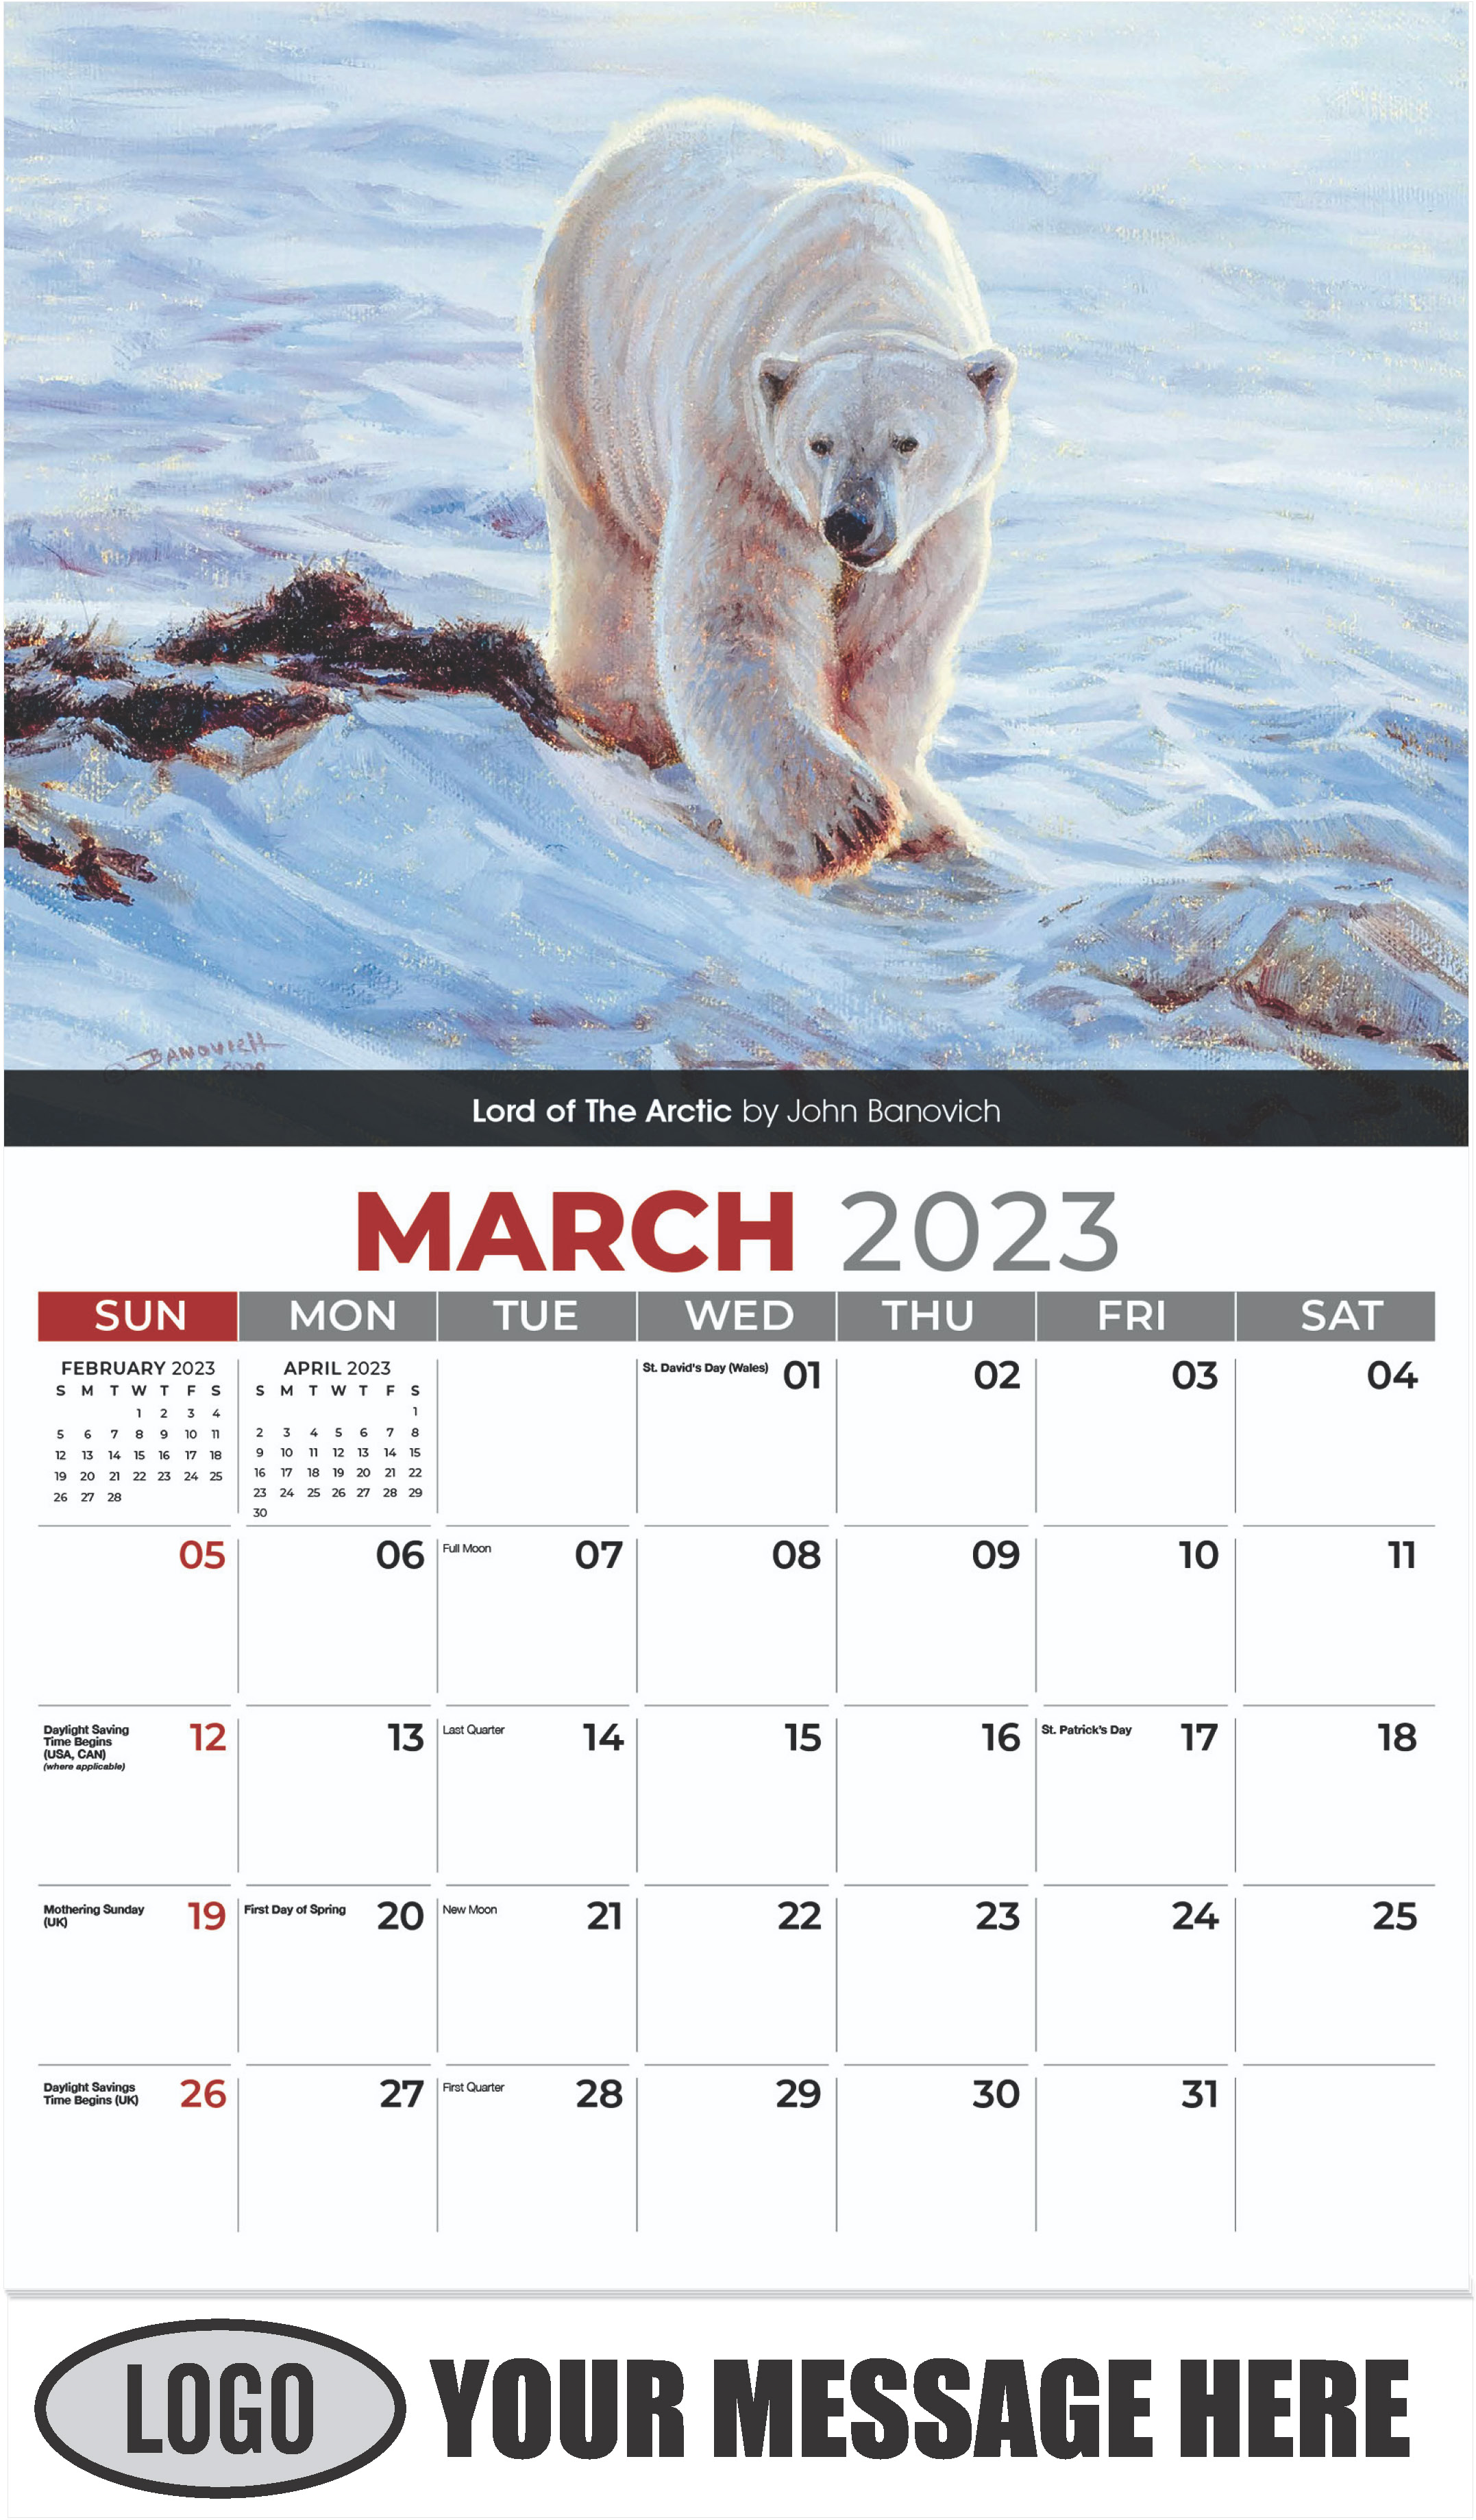 Lord of The Arctic by John Banovich - March - Wildlife Portraits 2023 Promotional Calendar